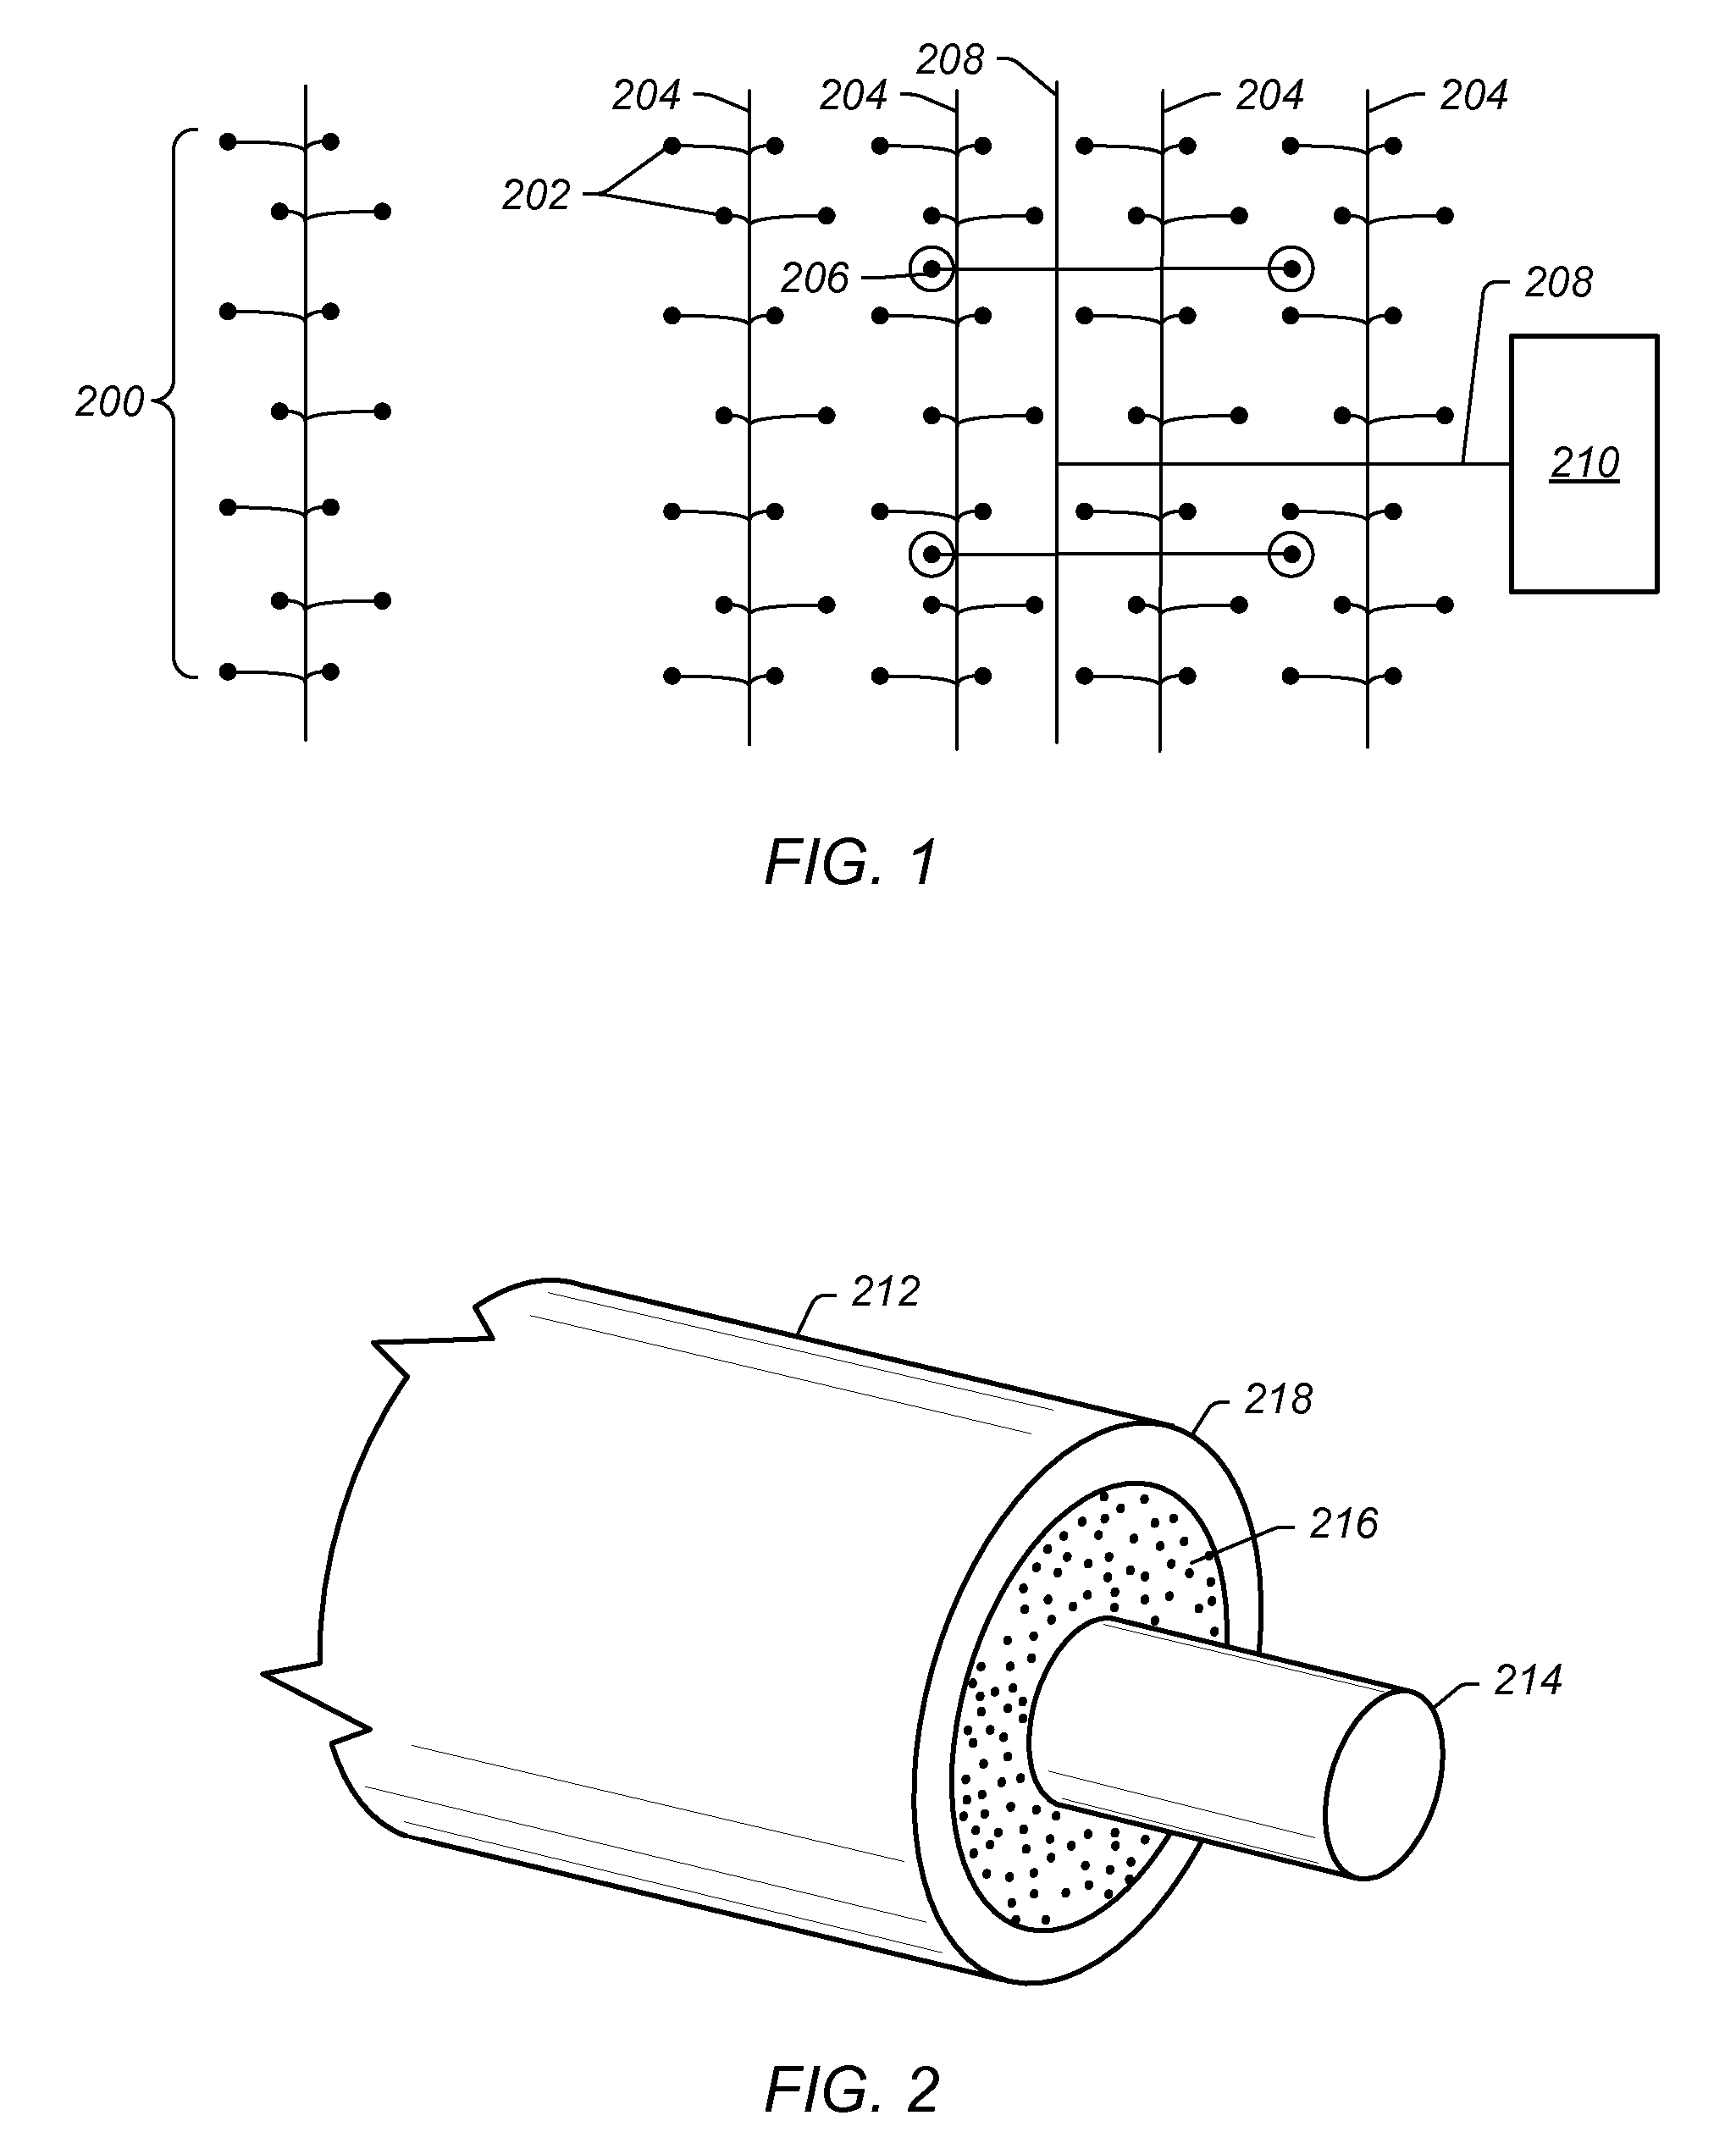 Press-fit coupling joint for joining insulated conductors